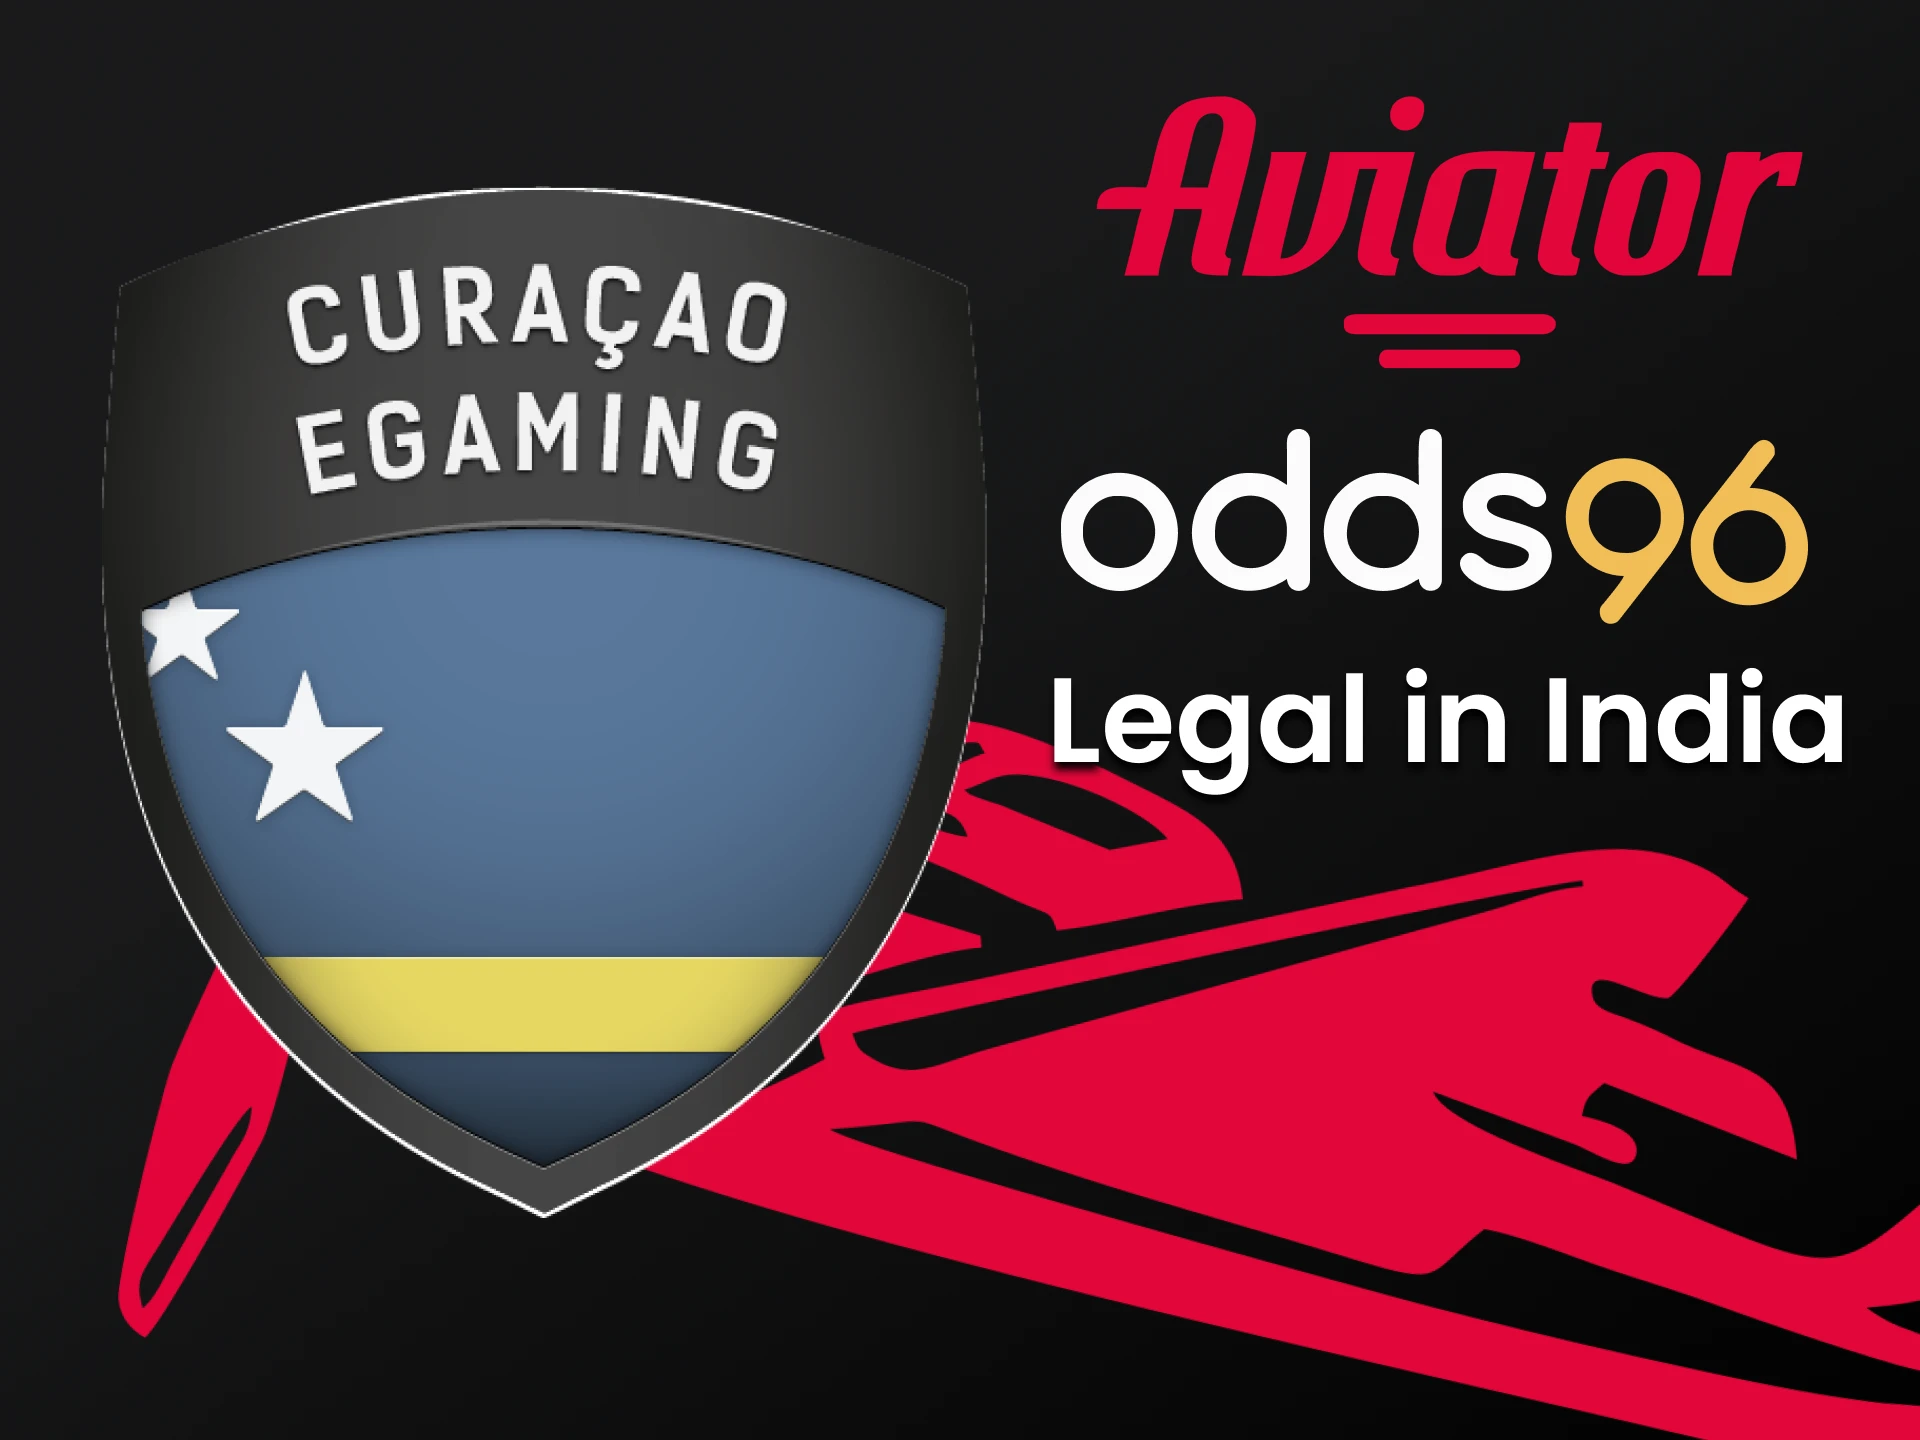 It is legal to play Aviator on Odds96.